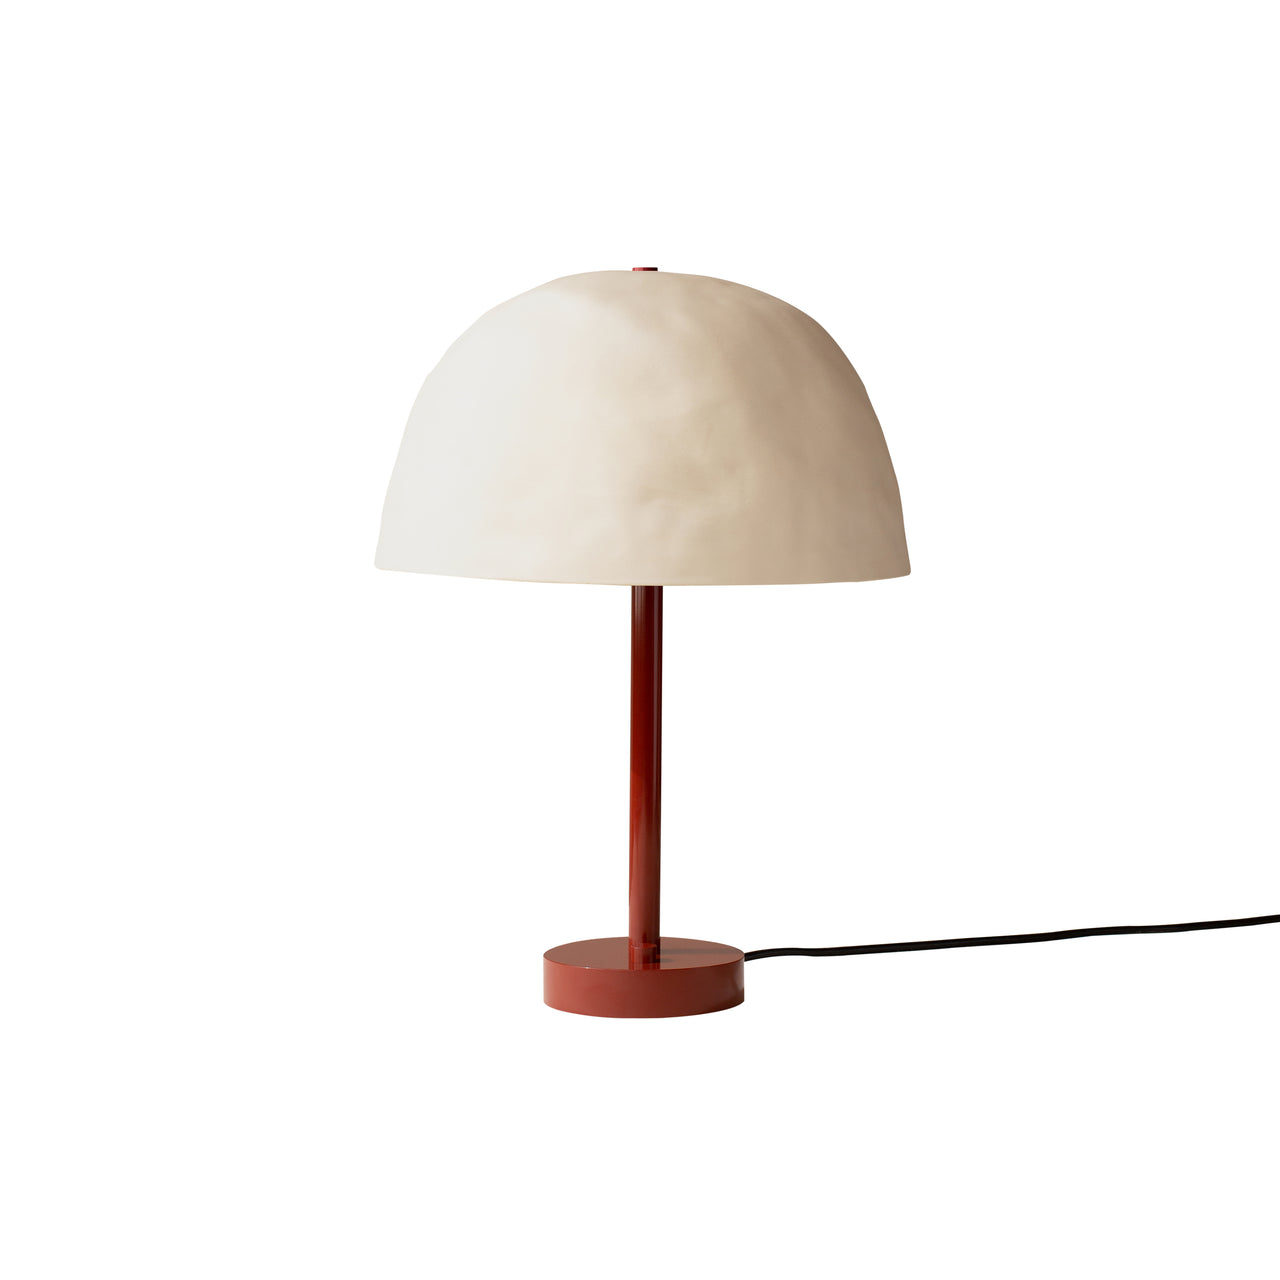 Dome Table Lamp: White Clay + Oxide Red